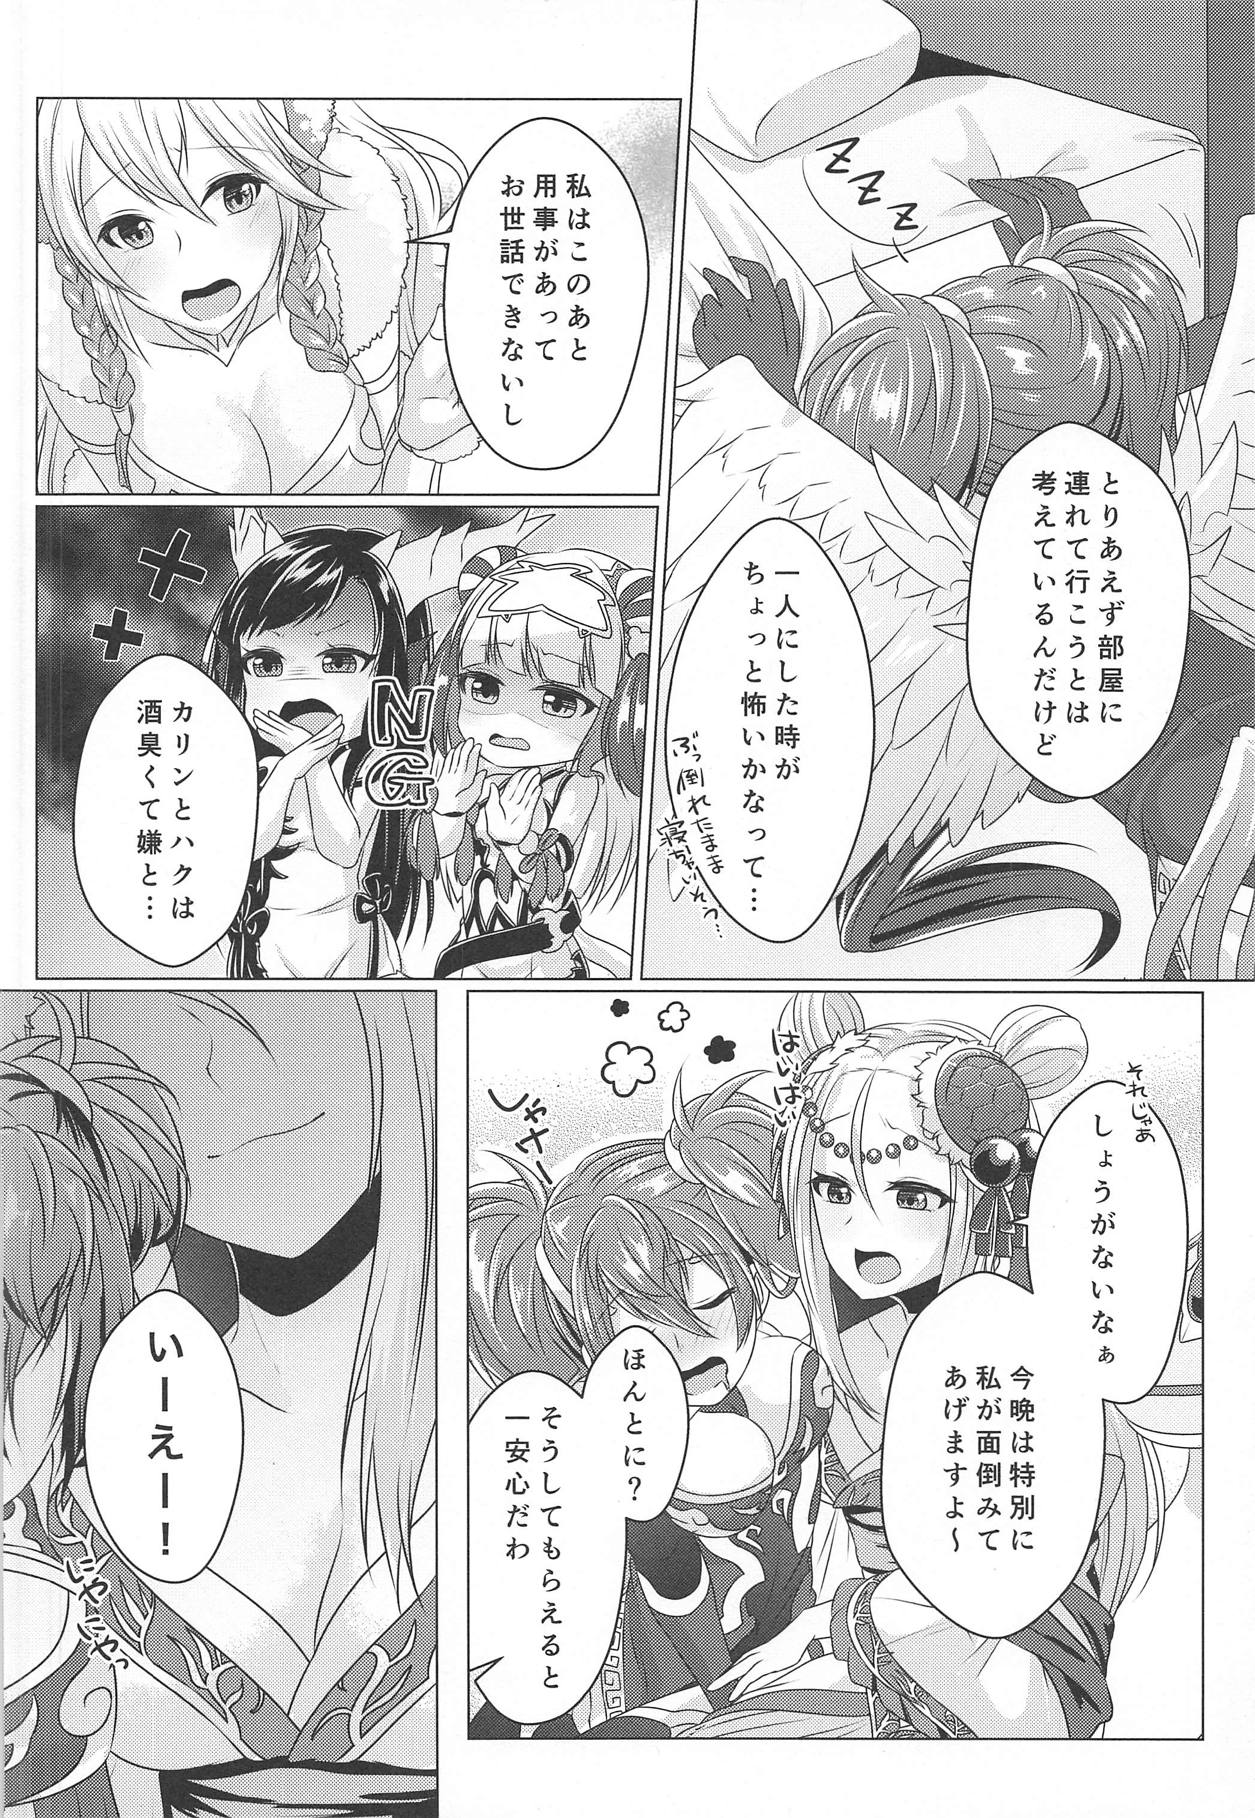 (C92) [YZ+ (Yuzuto Sen)] Reikan Tentacle 2 and M (Puzzle & Dragons) page 7 full